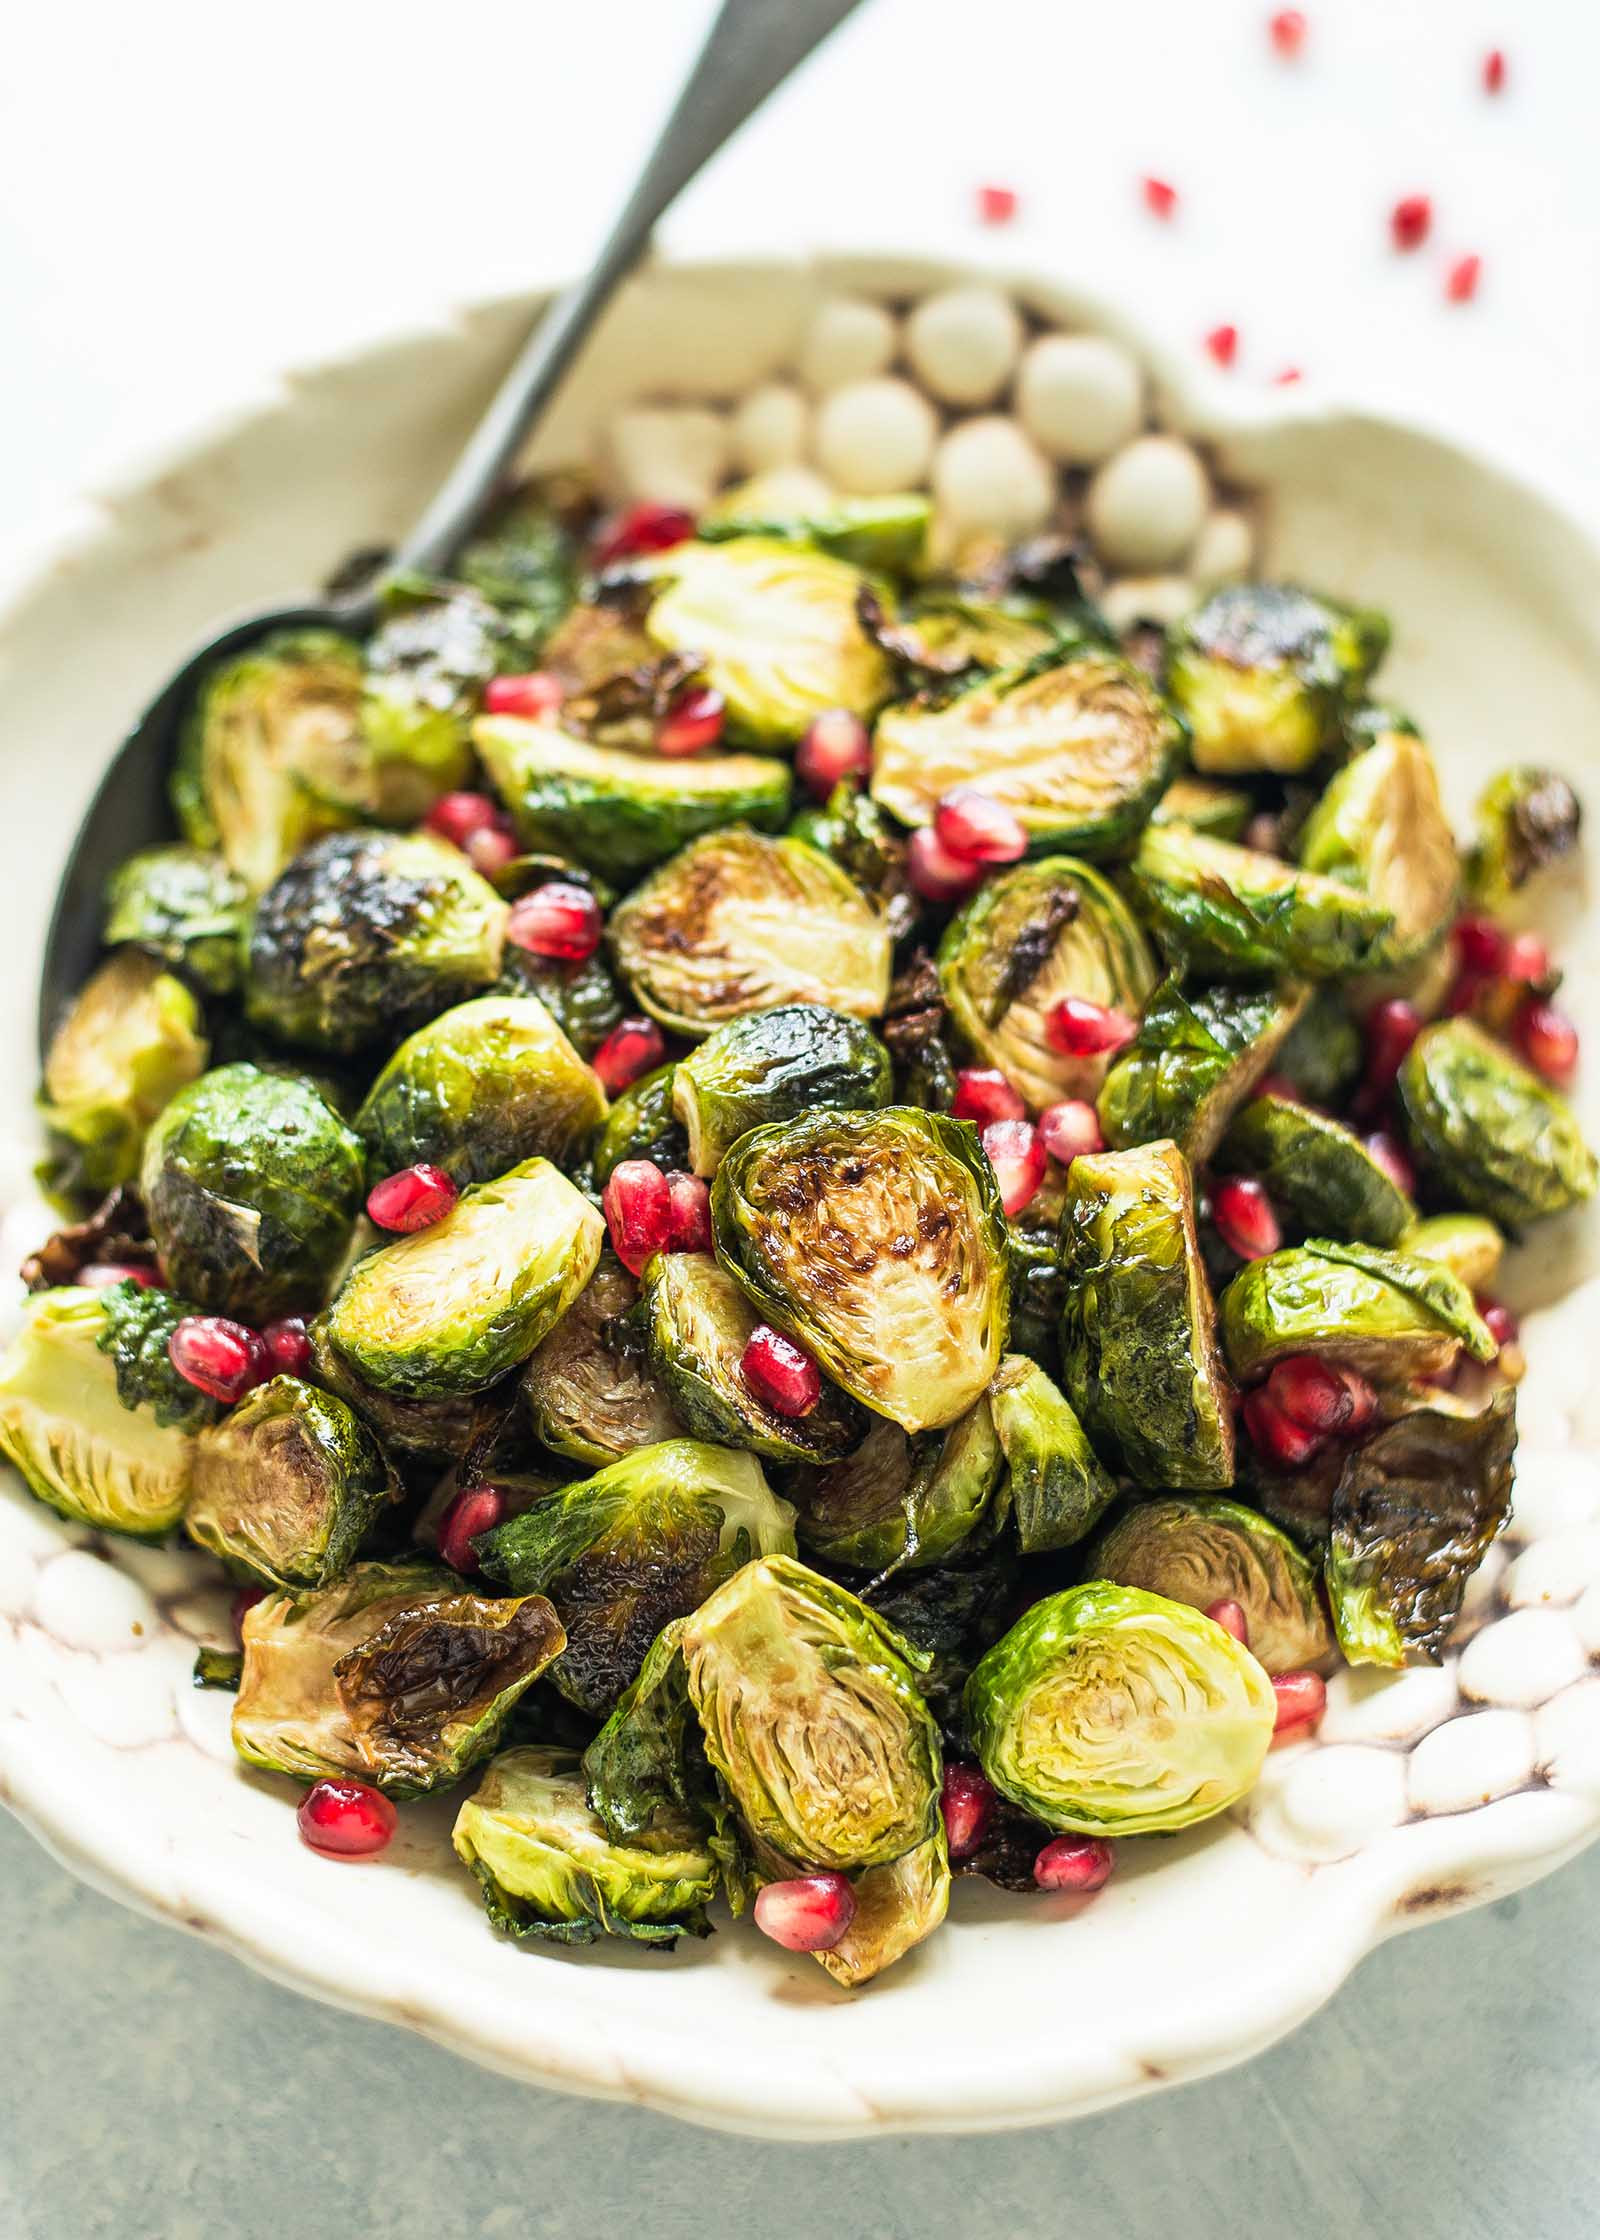 Brussels Sprouts Thanksgiving Side Dishes
 Roasted Brussels Sprouts with Pomegranate Balsamic Glaze